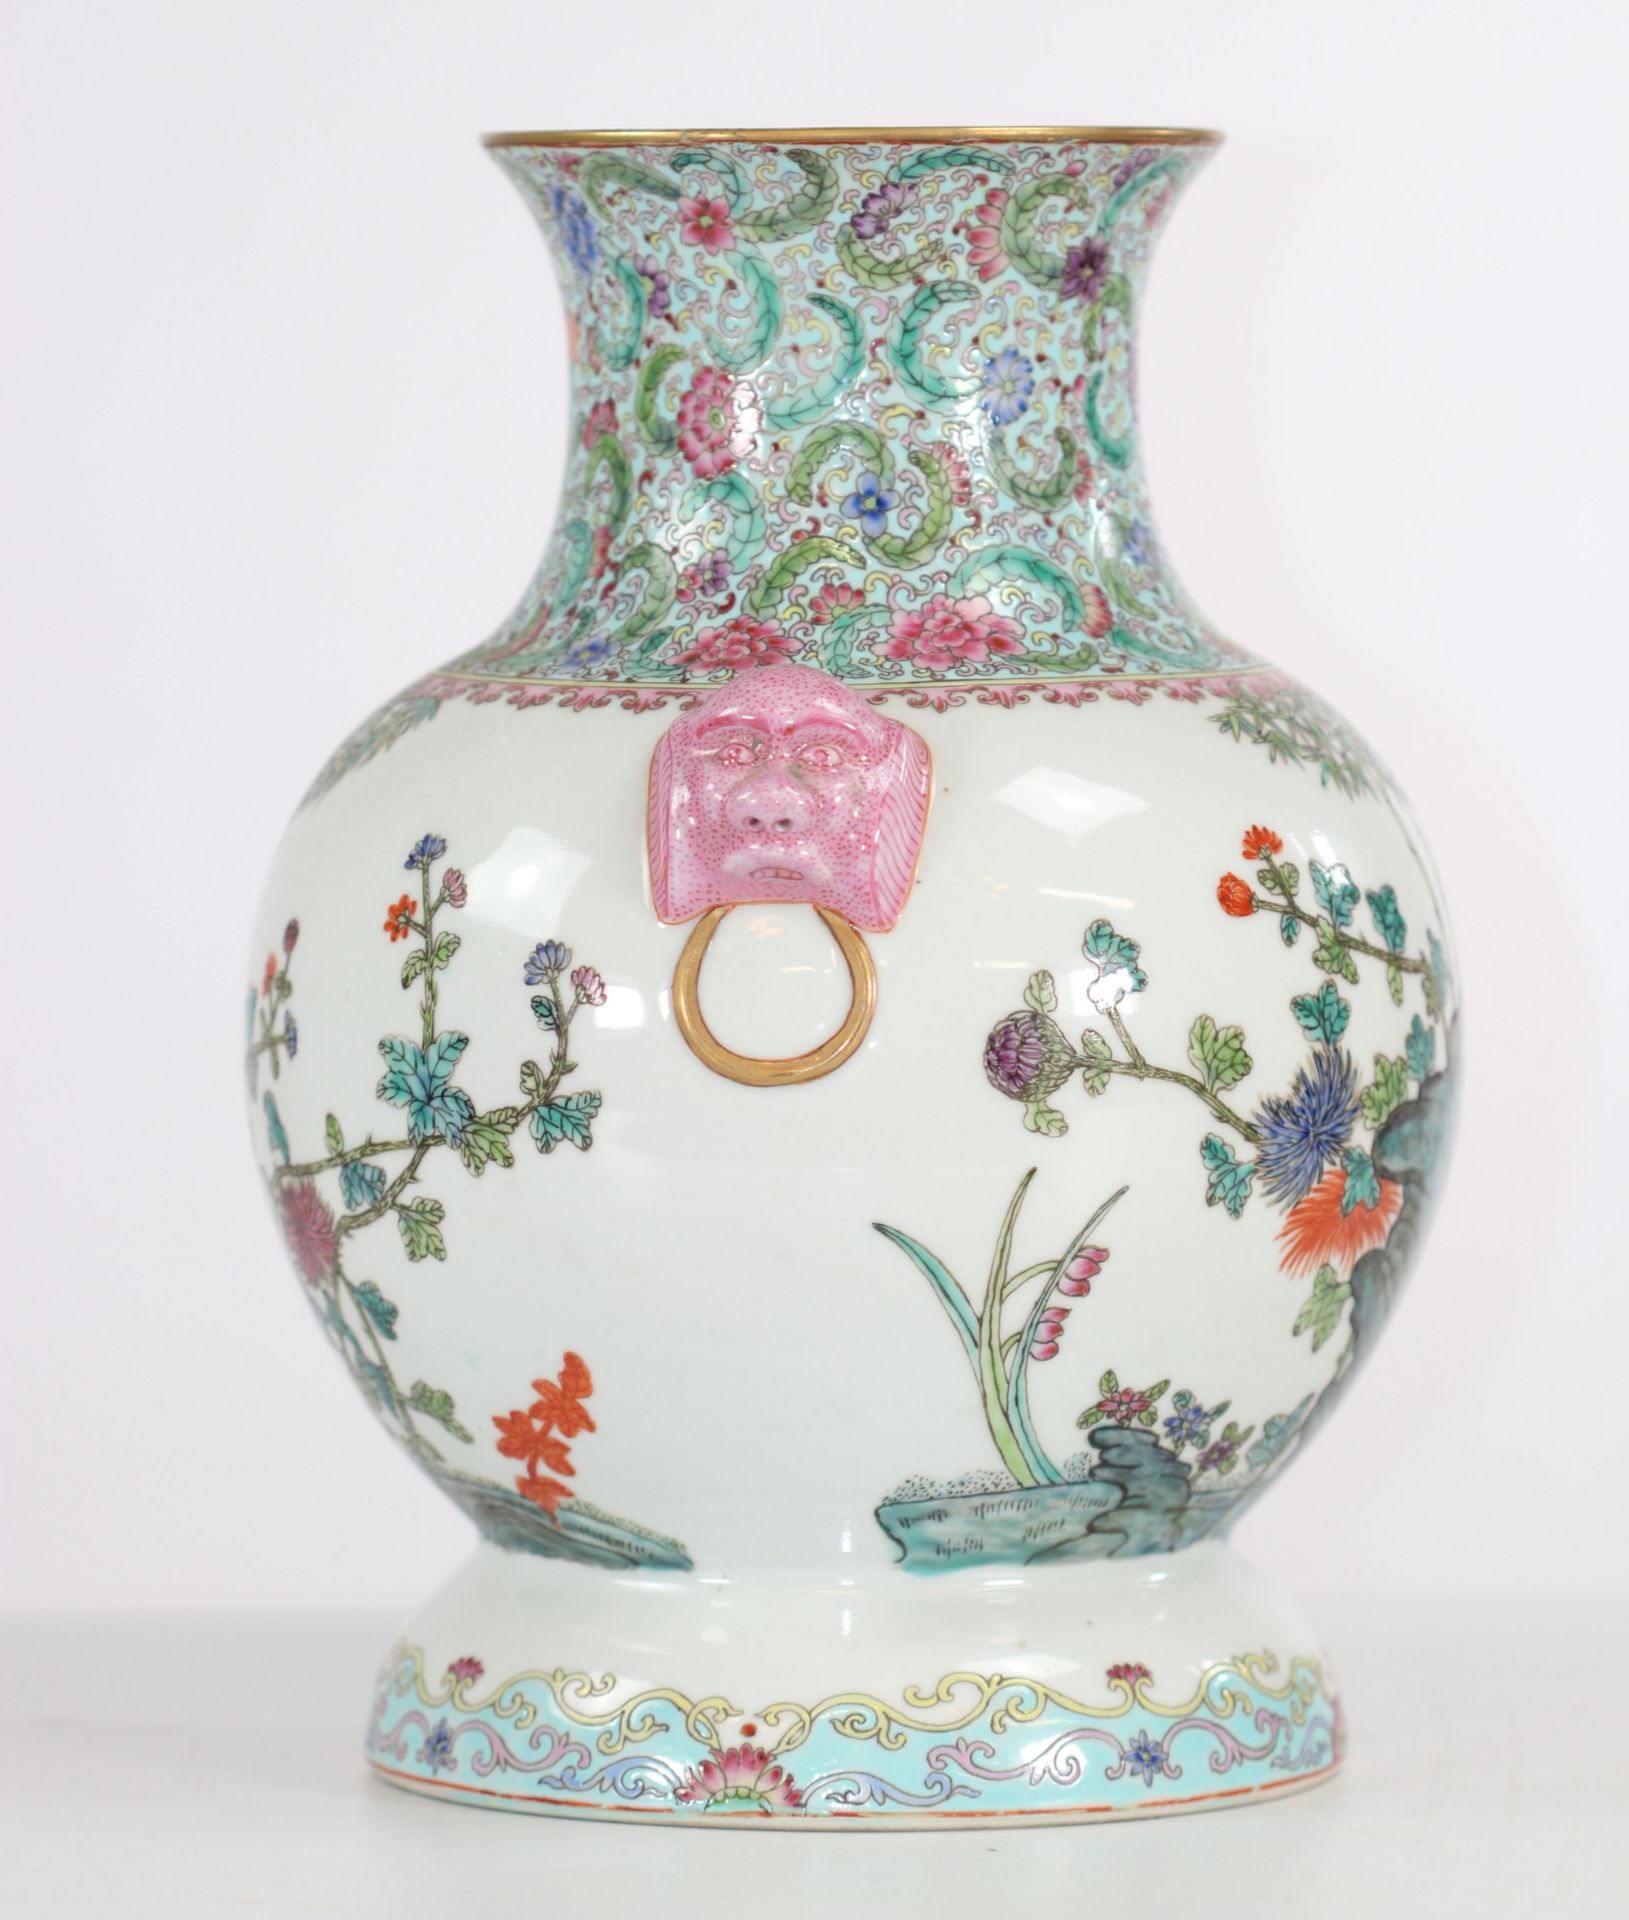 China porcelain vase decorated with quail republic period mark under the piece - Image 2 of 5